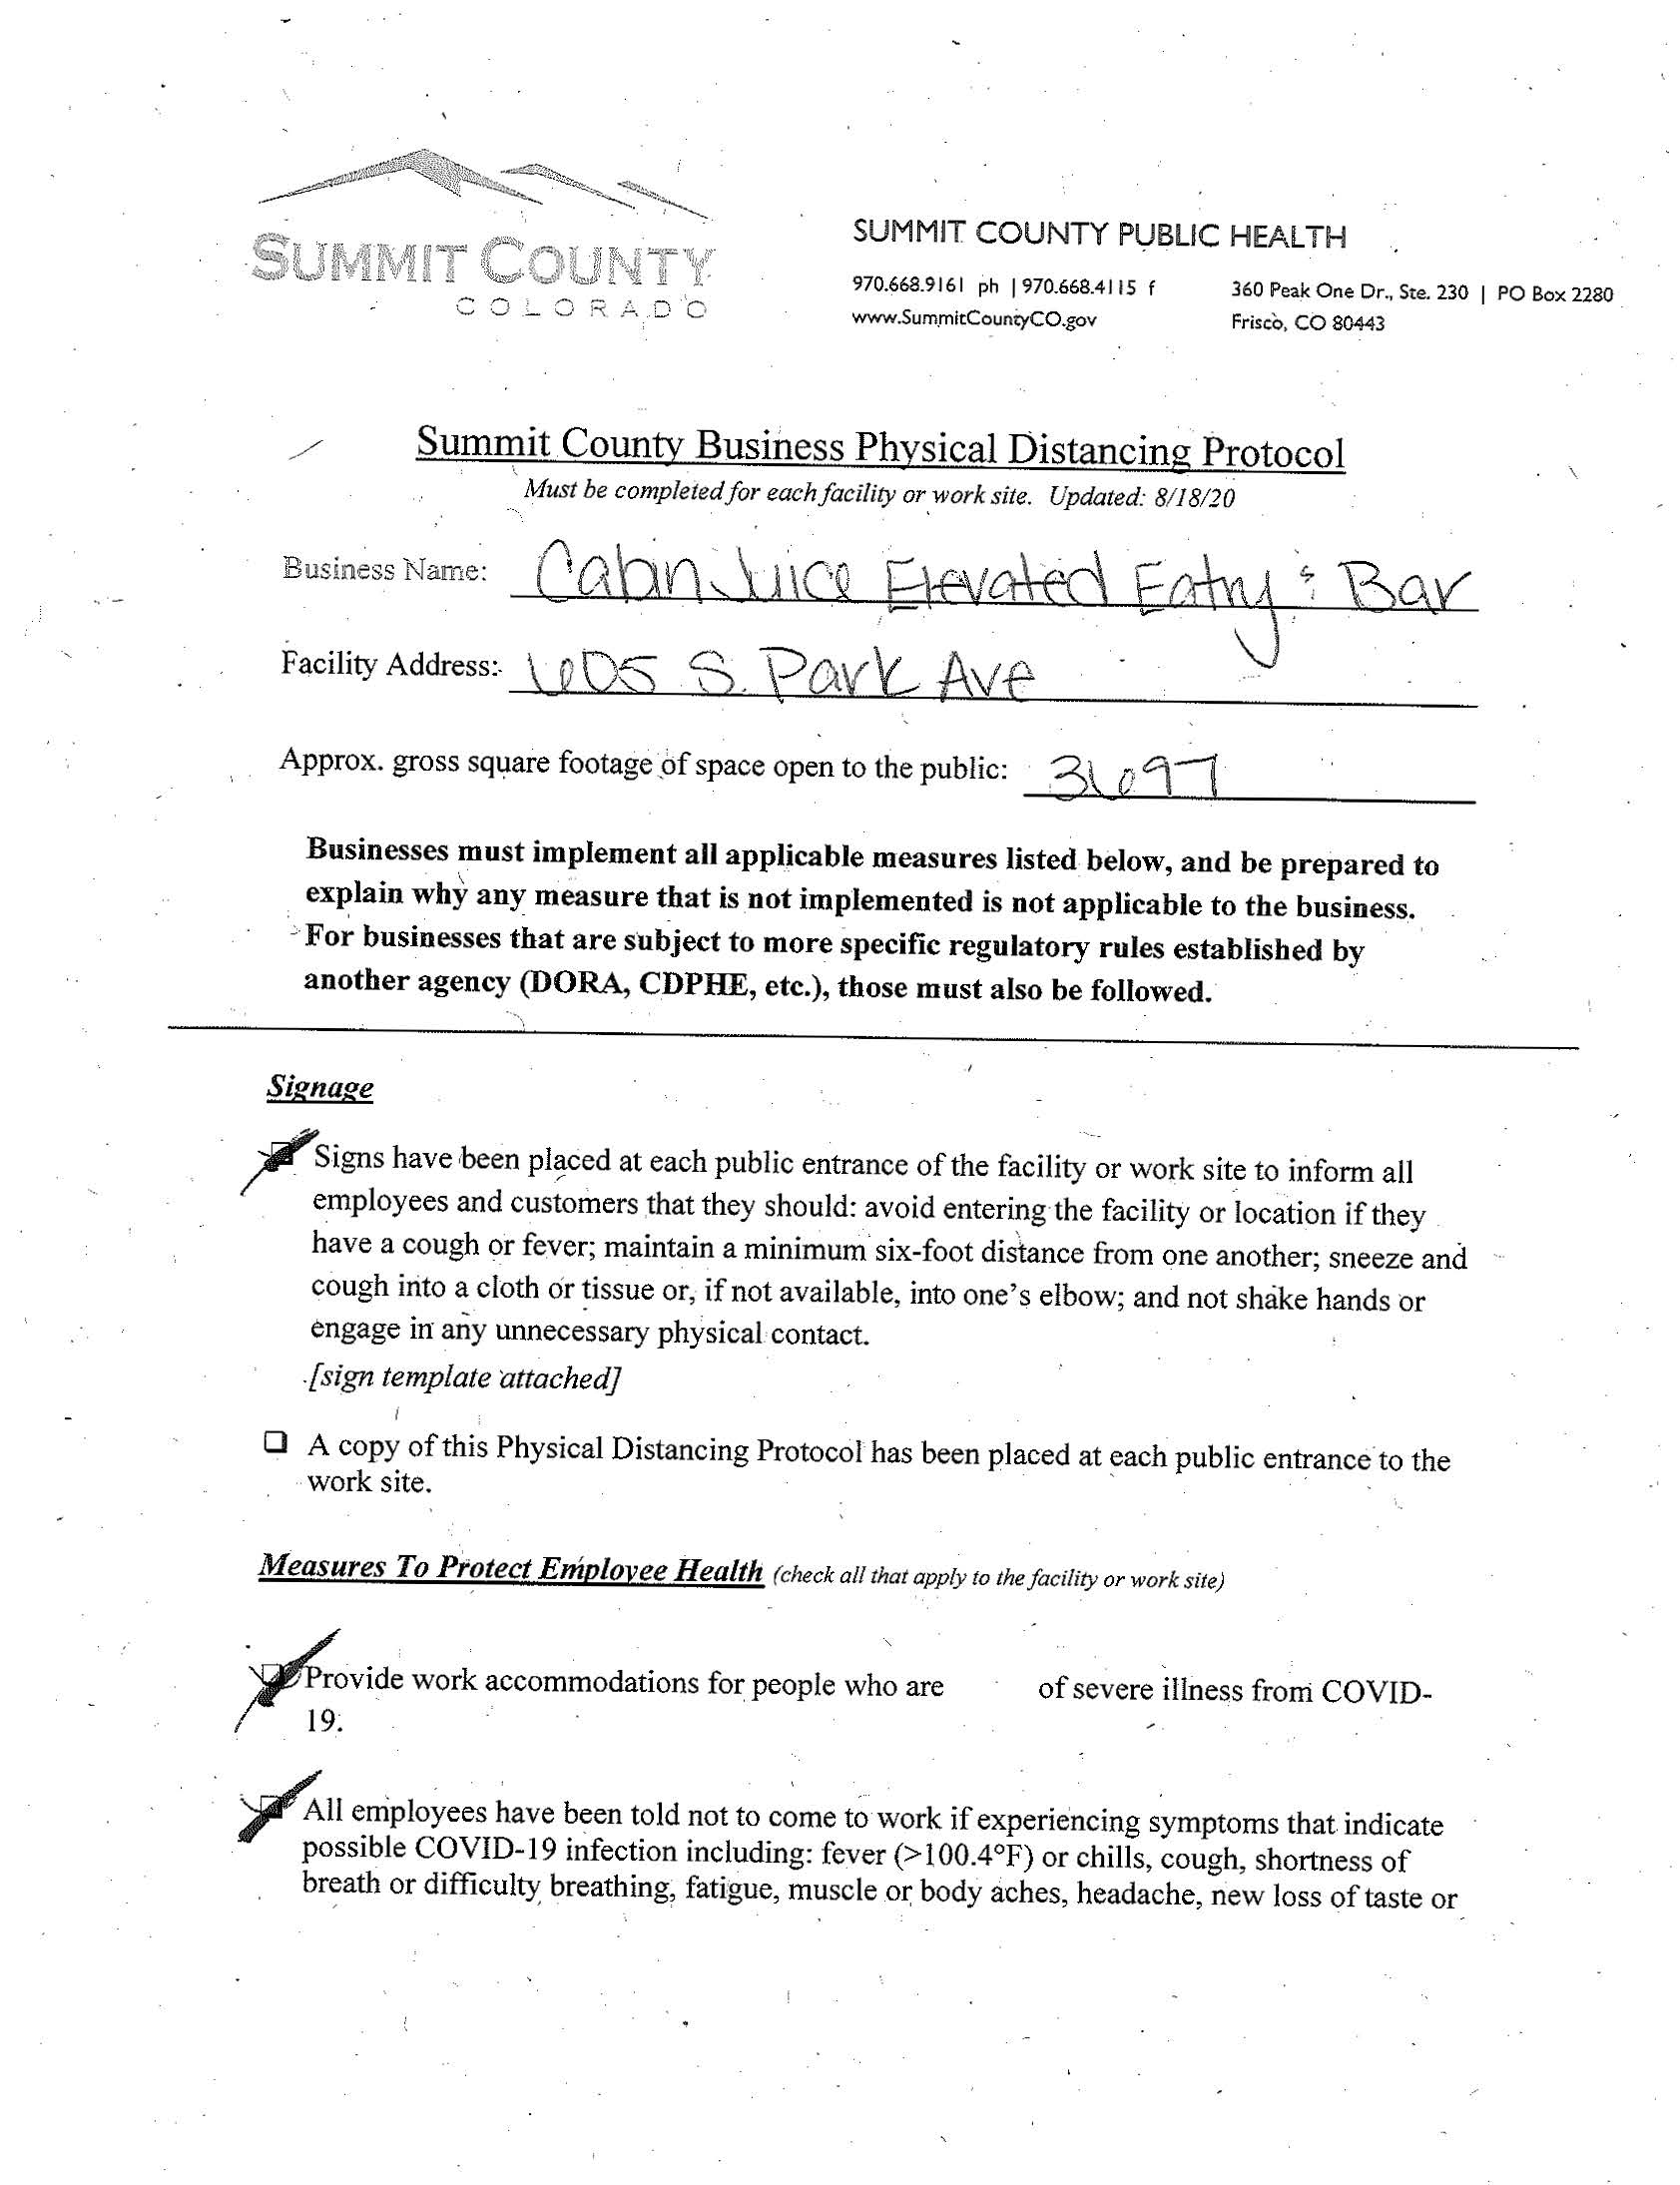 Summit County Public Health form page 1